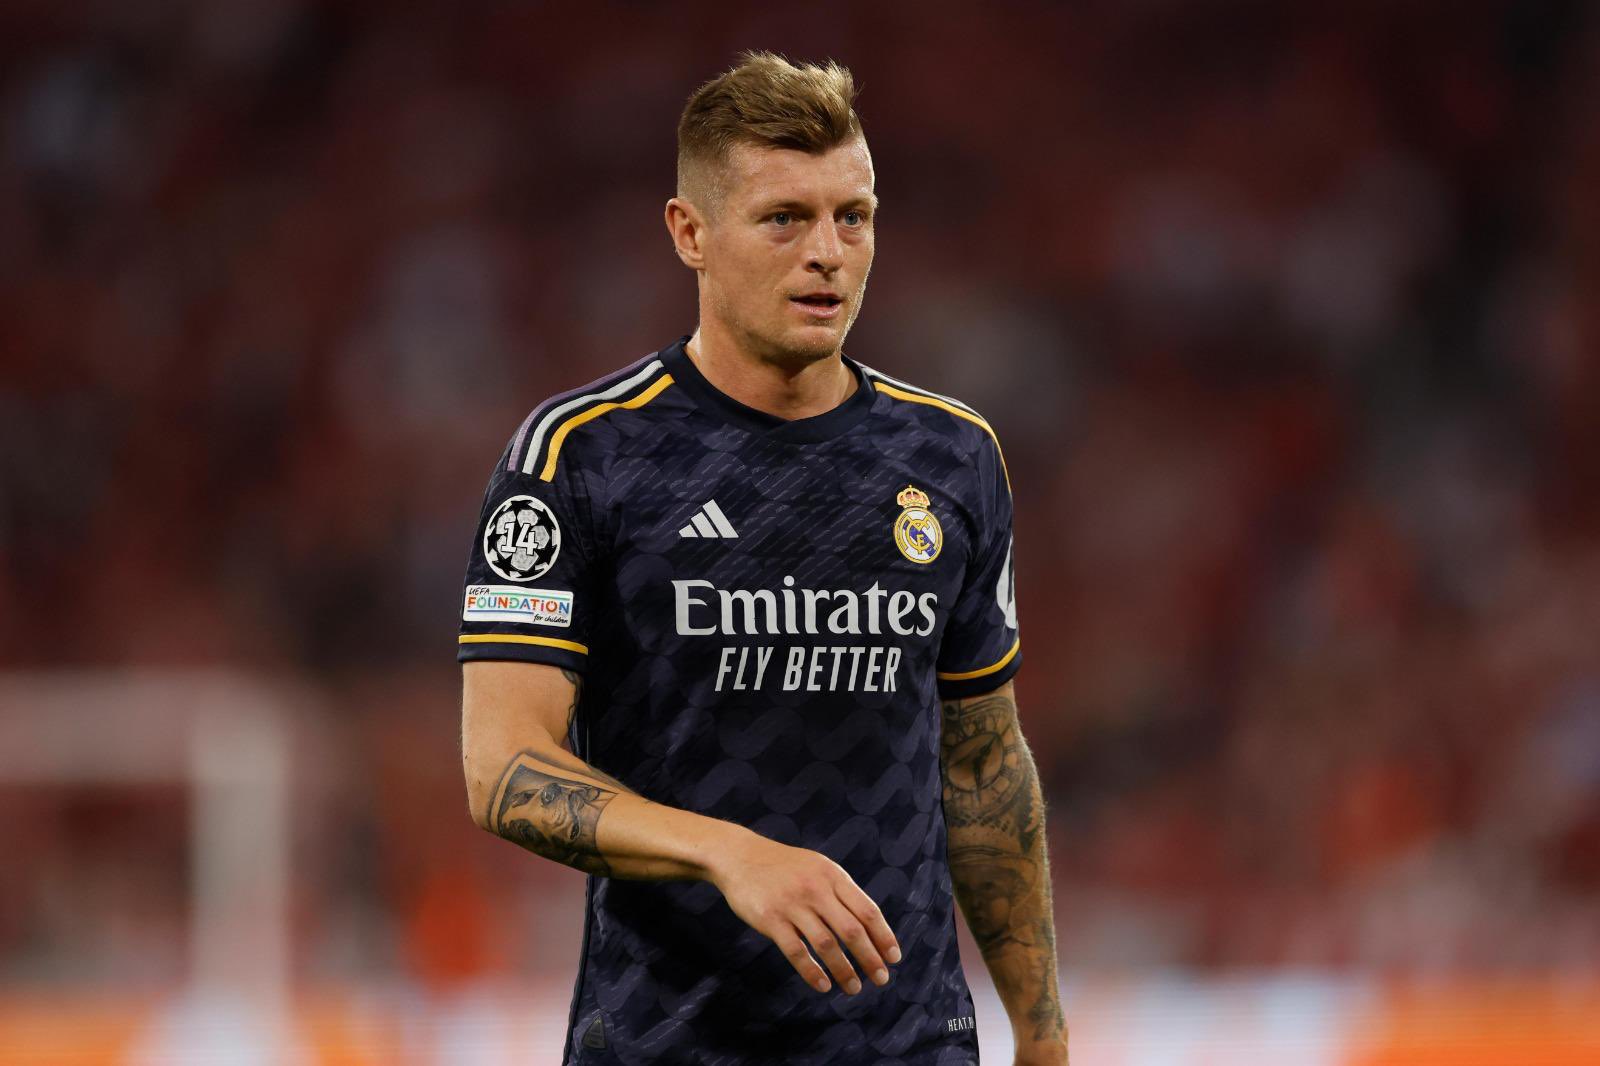 Real Madrid paying no attention to star’s comments on future this summer post-Bayern Munich